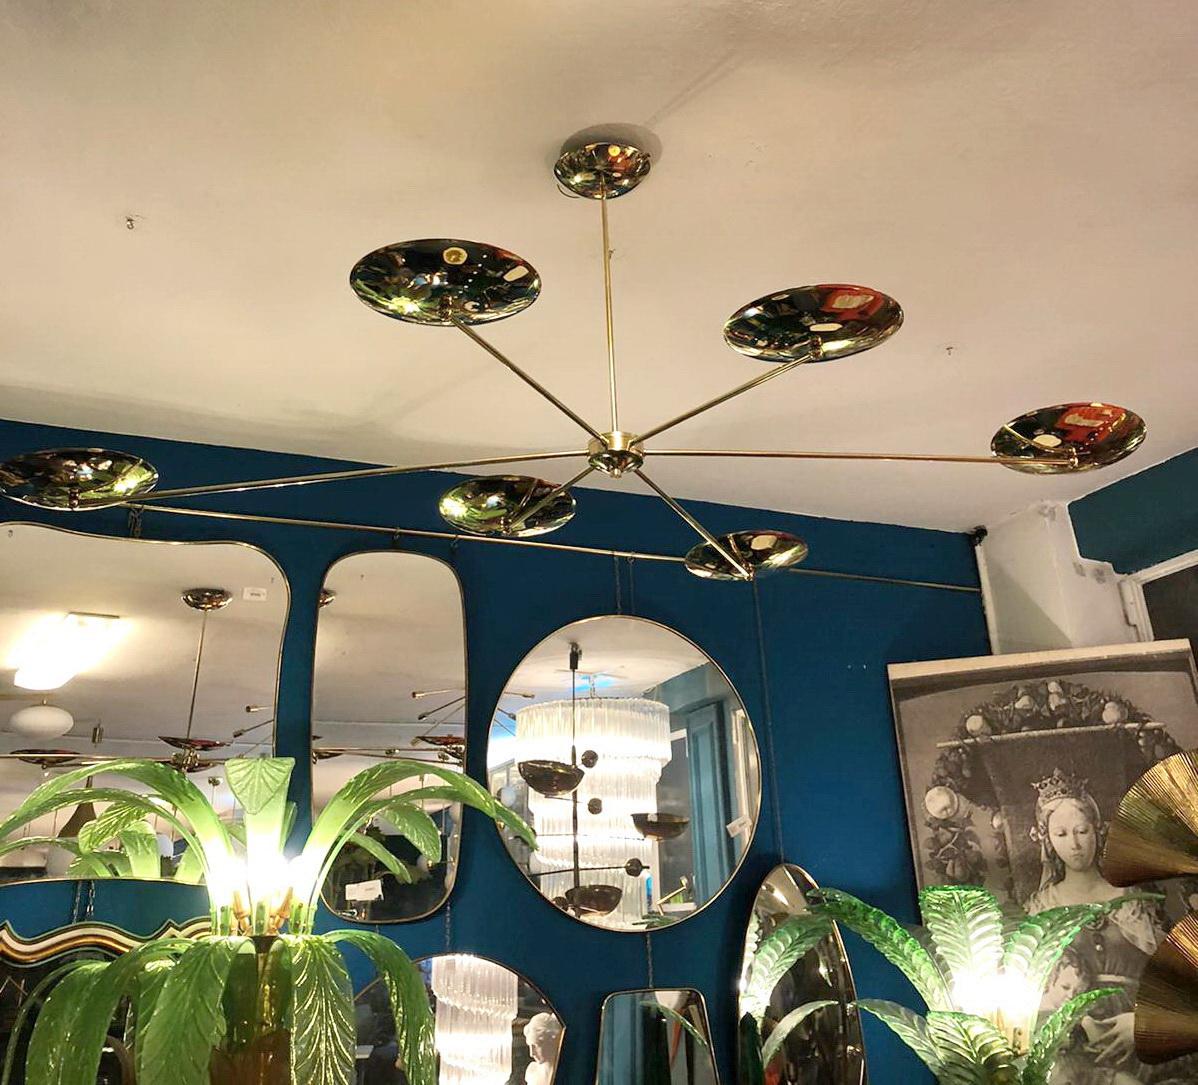 Inspired by the Italian midcentury designs, this ceiling / wall light will make the focus center of your interior. The arms radiate all around the stem, each ending with a brass shade. An attractive customizable architectural ceiling lamp with